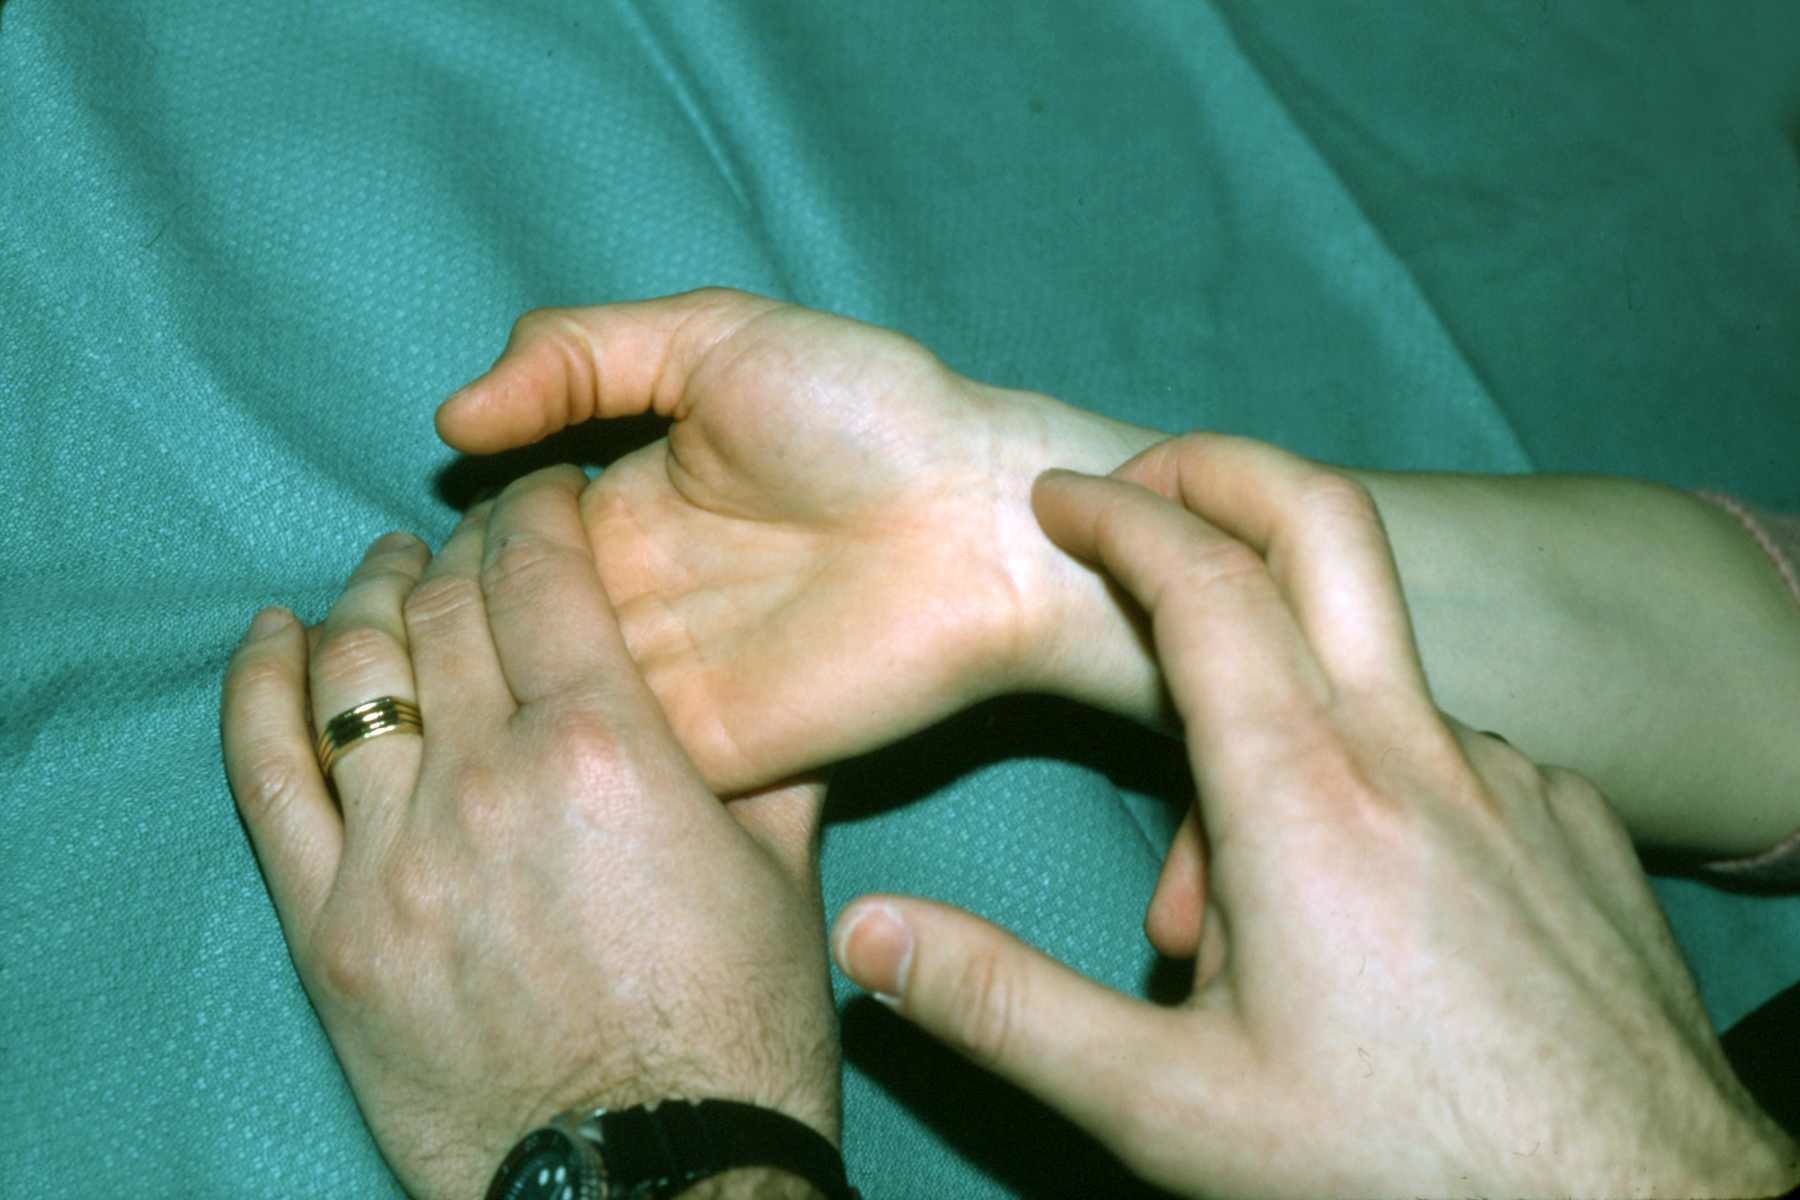 TINEL'S SIGN MEDIAN NERVE - This test is done by tapping on the median nerve just proximal to the wrist crease. The wrist is held in 30 degrees of dorsiflexion while the nerve is percussed. The wrist should be held loosely so that the patient doesn't tighten his volar ligaments and muscles during the test.